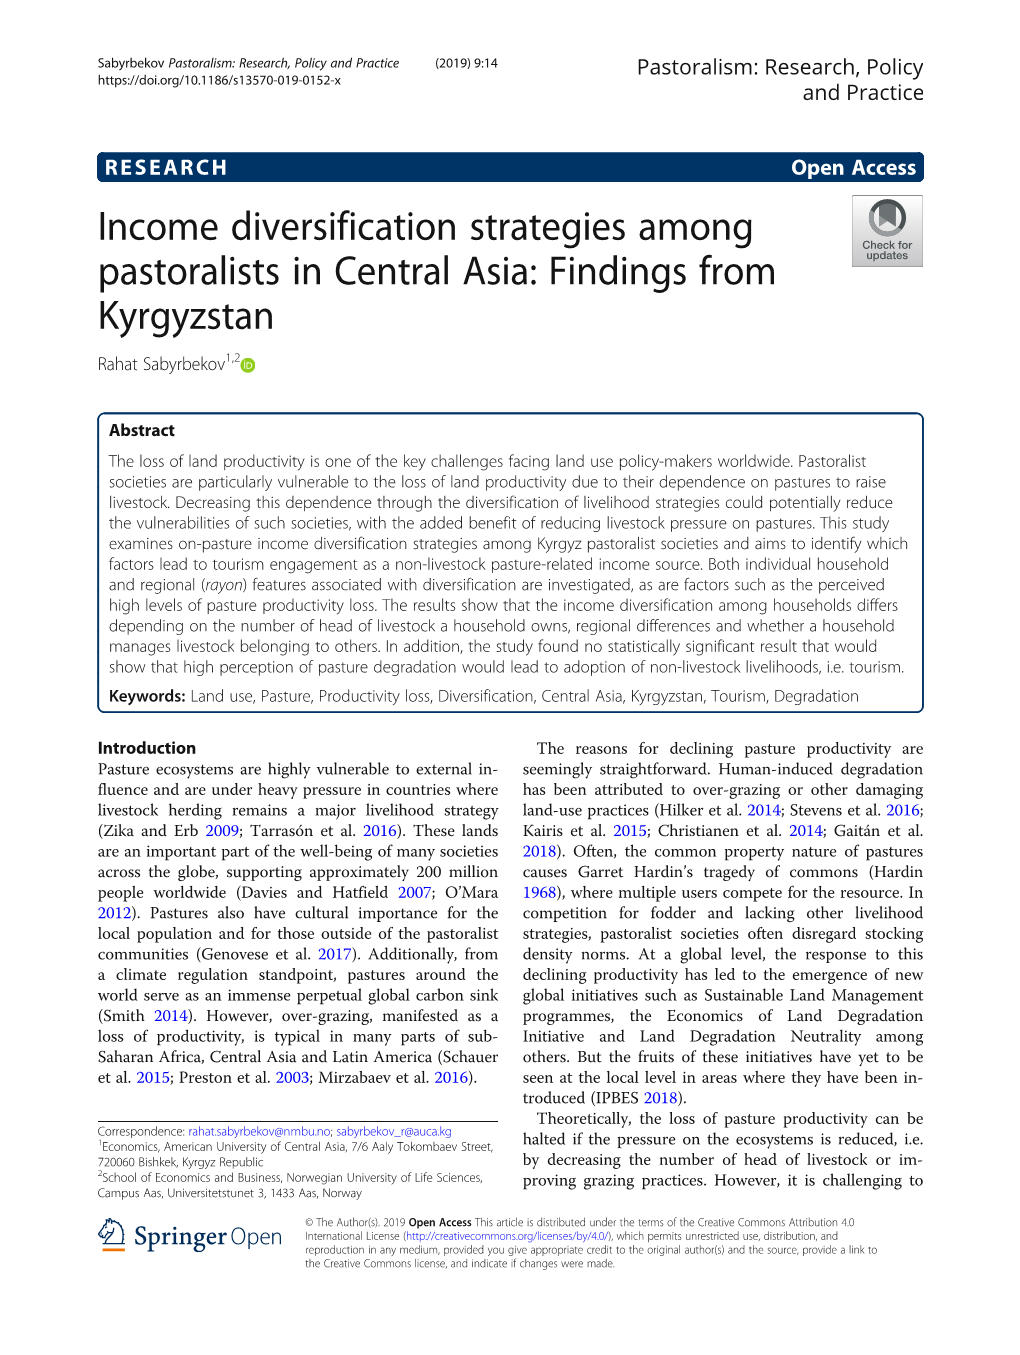 Income Diversification Strategies Among Pastoralists in Central Asia: Findings from Kyrgyzstan Rahat Sabyrbekov1,2